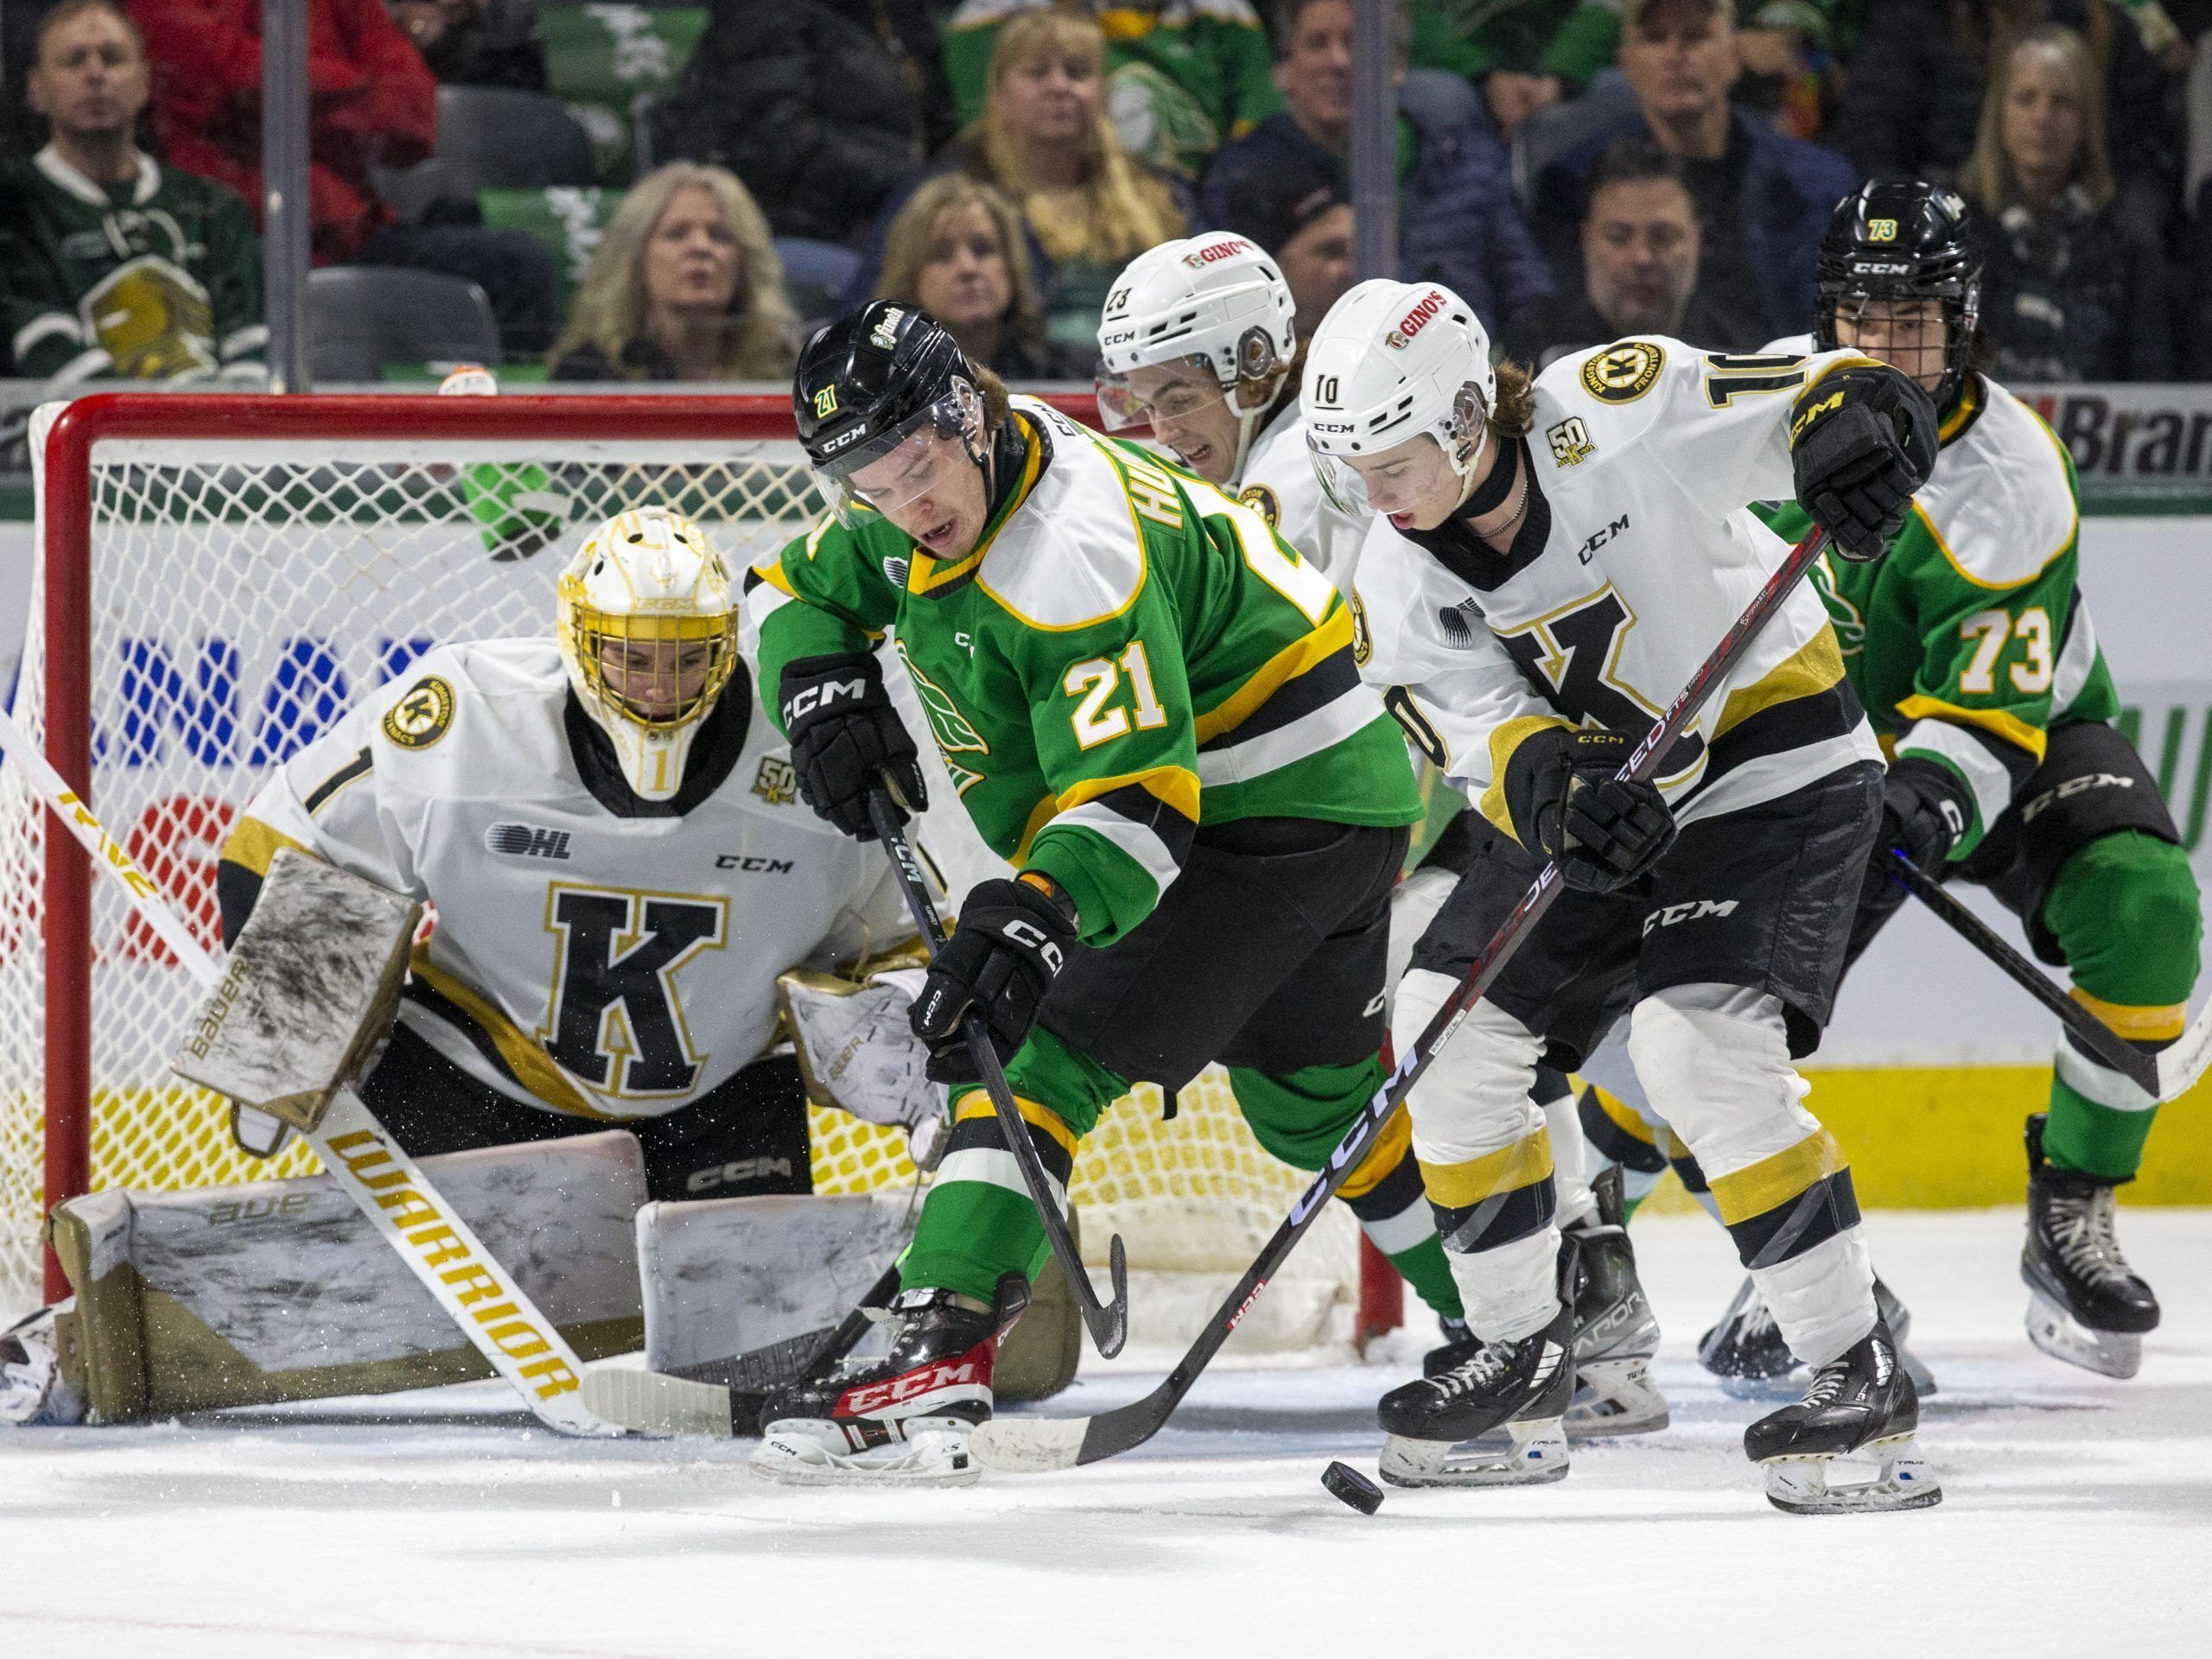 London Knights return home, score in bunches to keep No. 1 seed